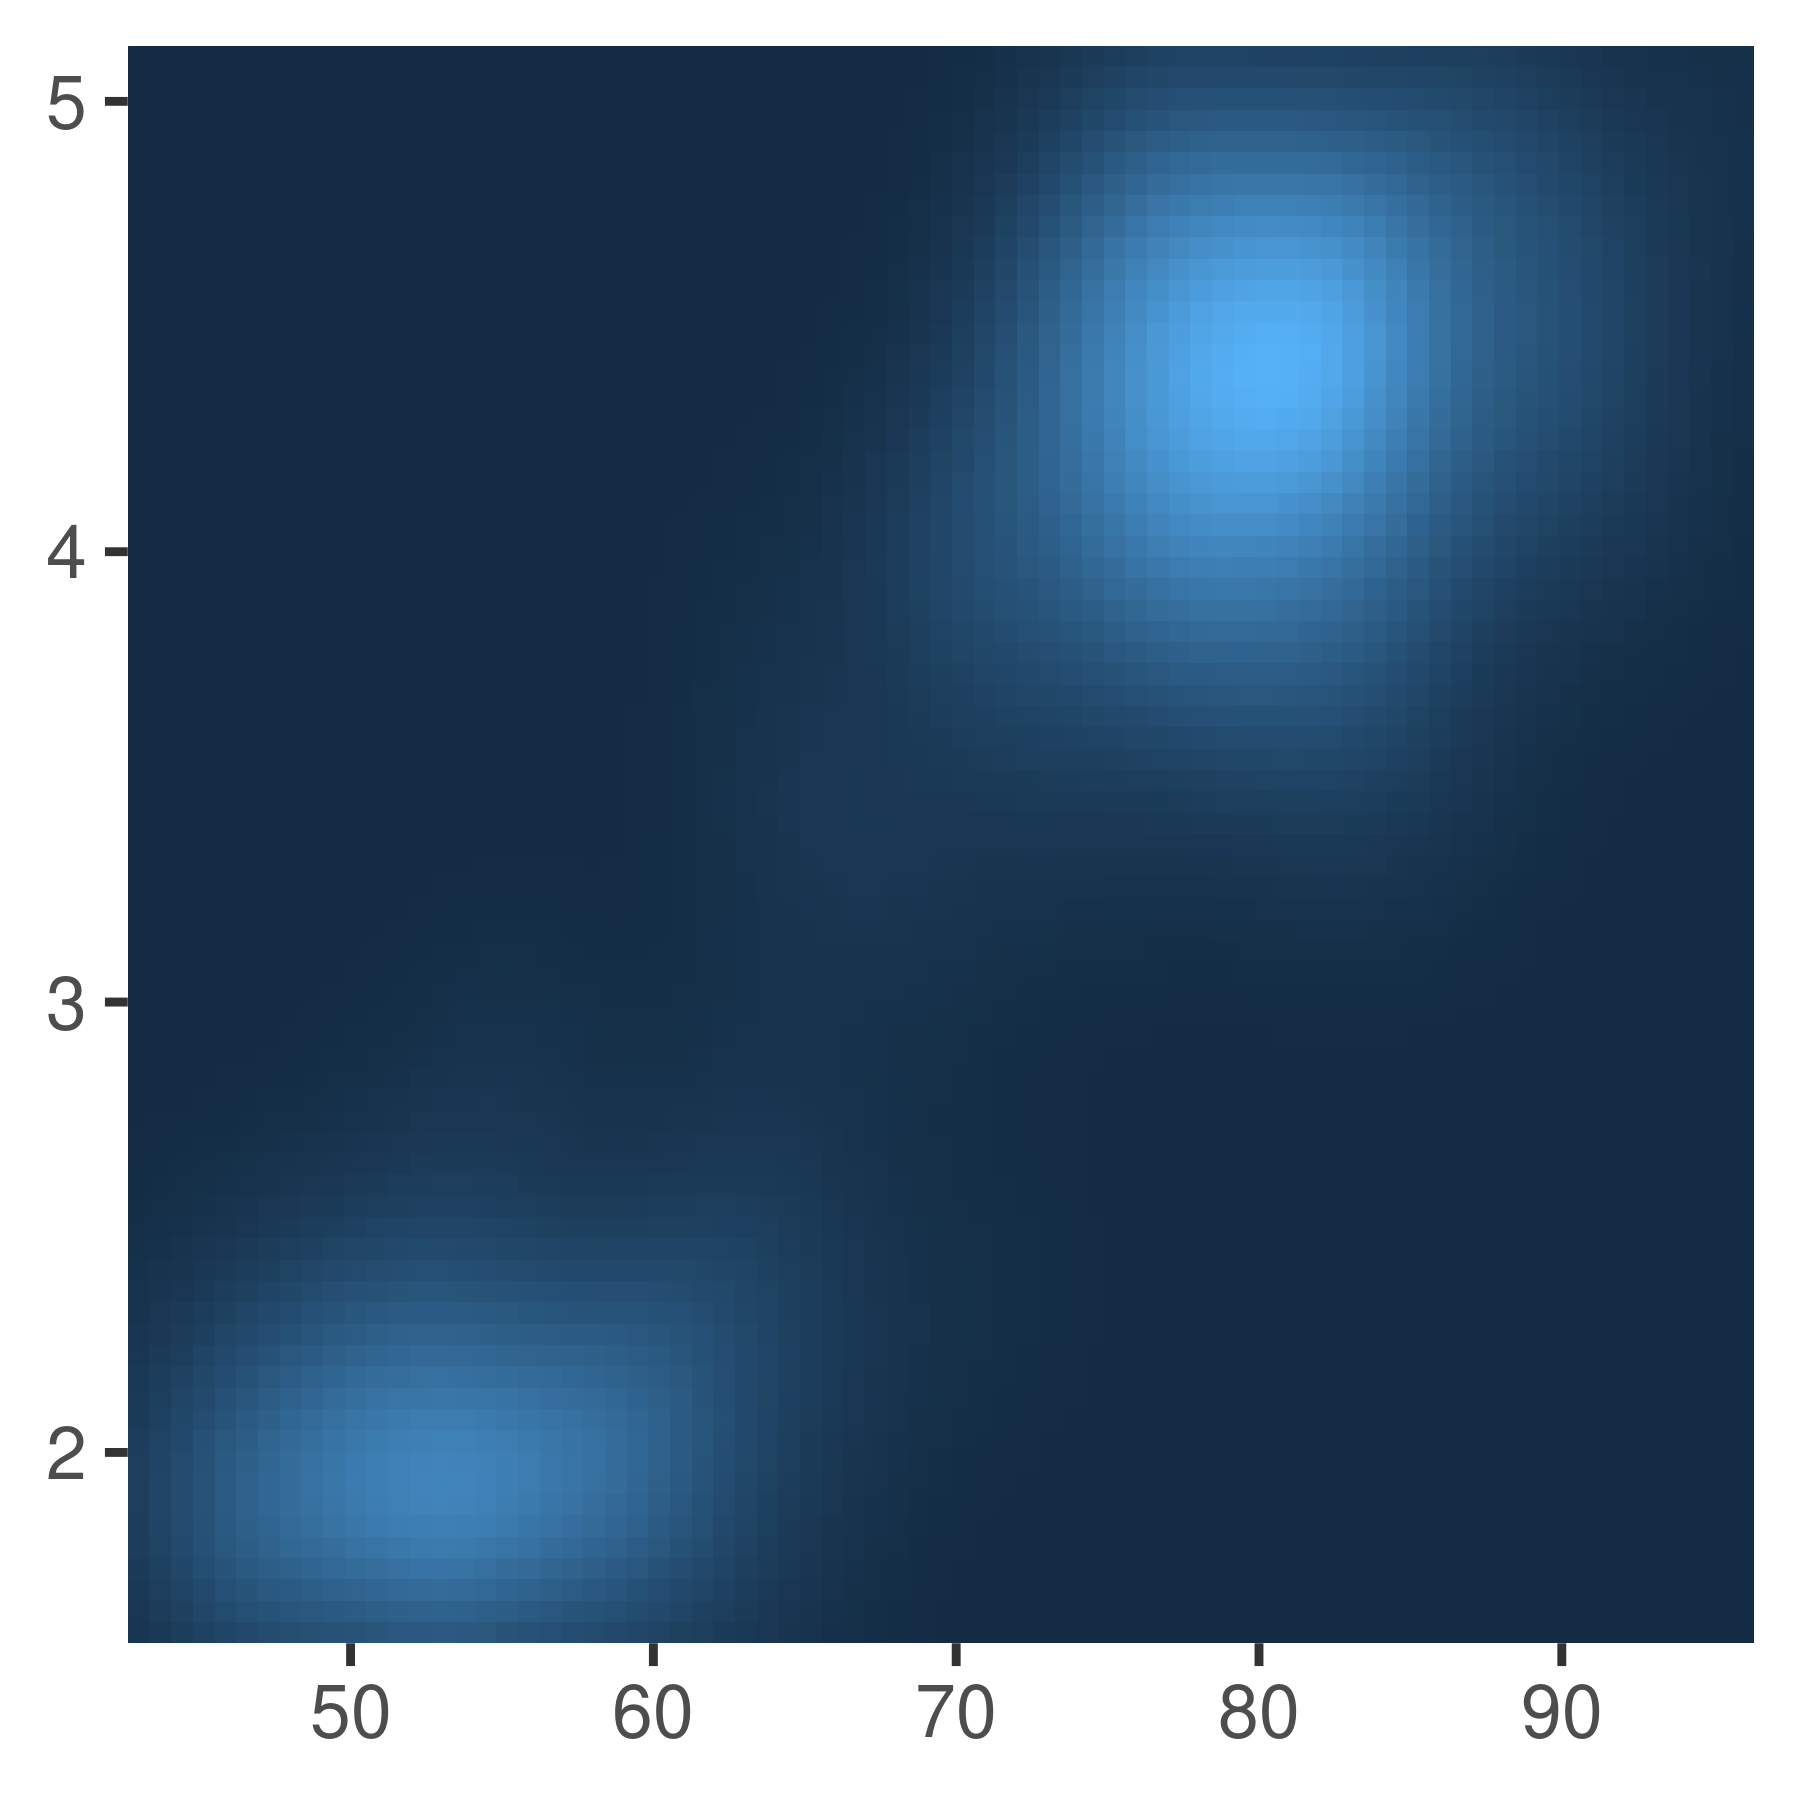 https://ggplot2-book.org/scales-colour_files/figure-html/unnamed-chunk-6-1.png